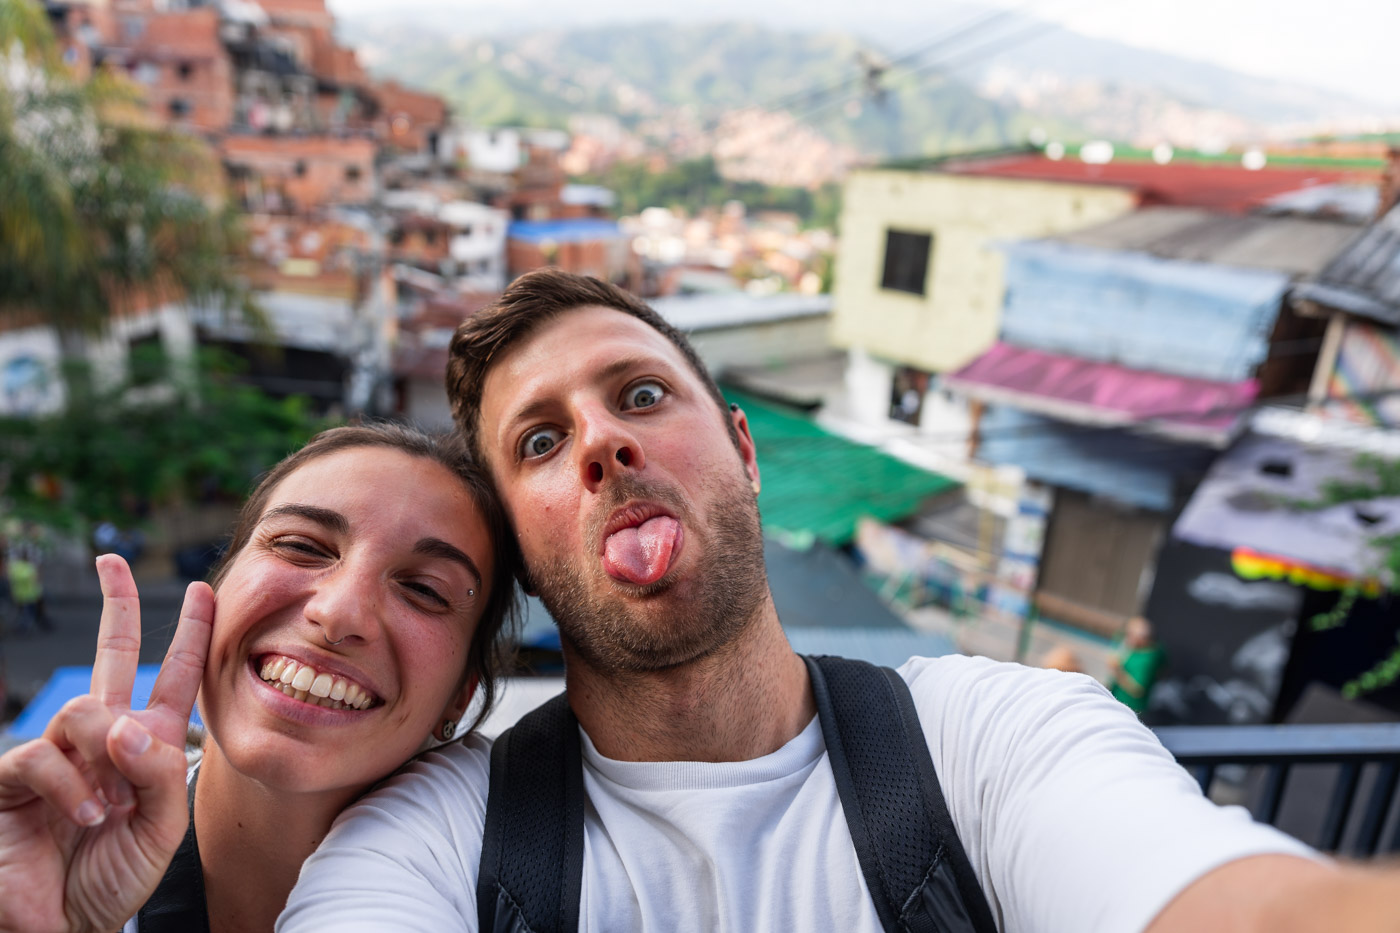 Ryan and Sara silly posing with a peace sign for a selfie in Comuna 13.